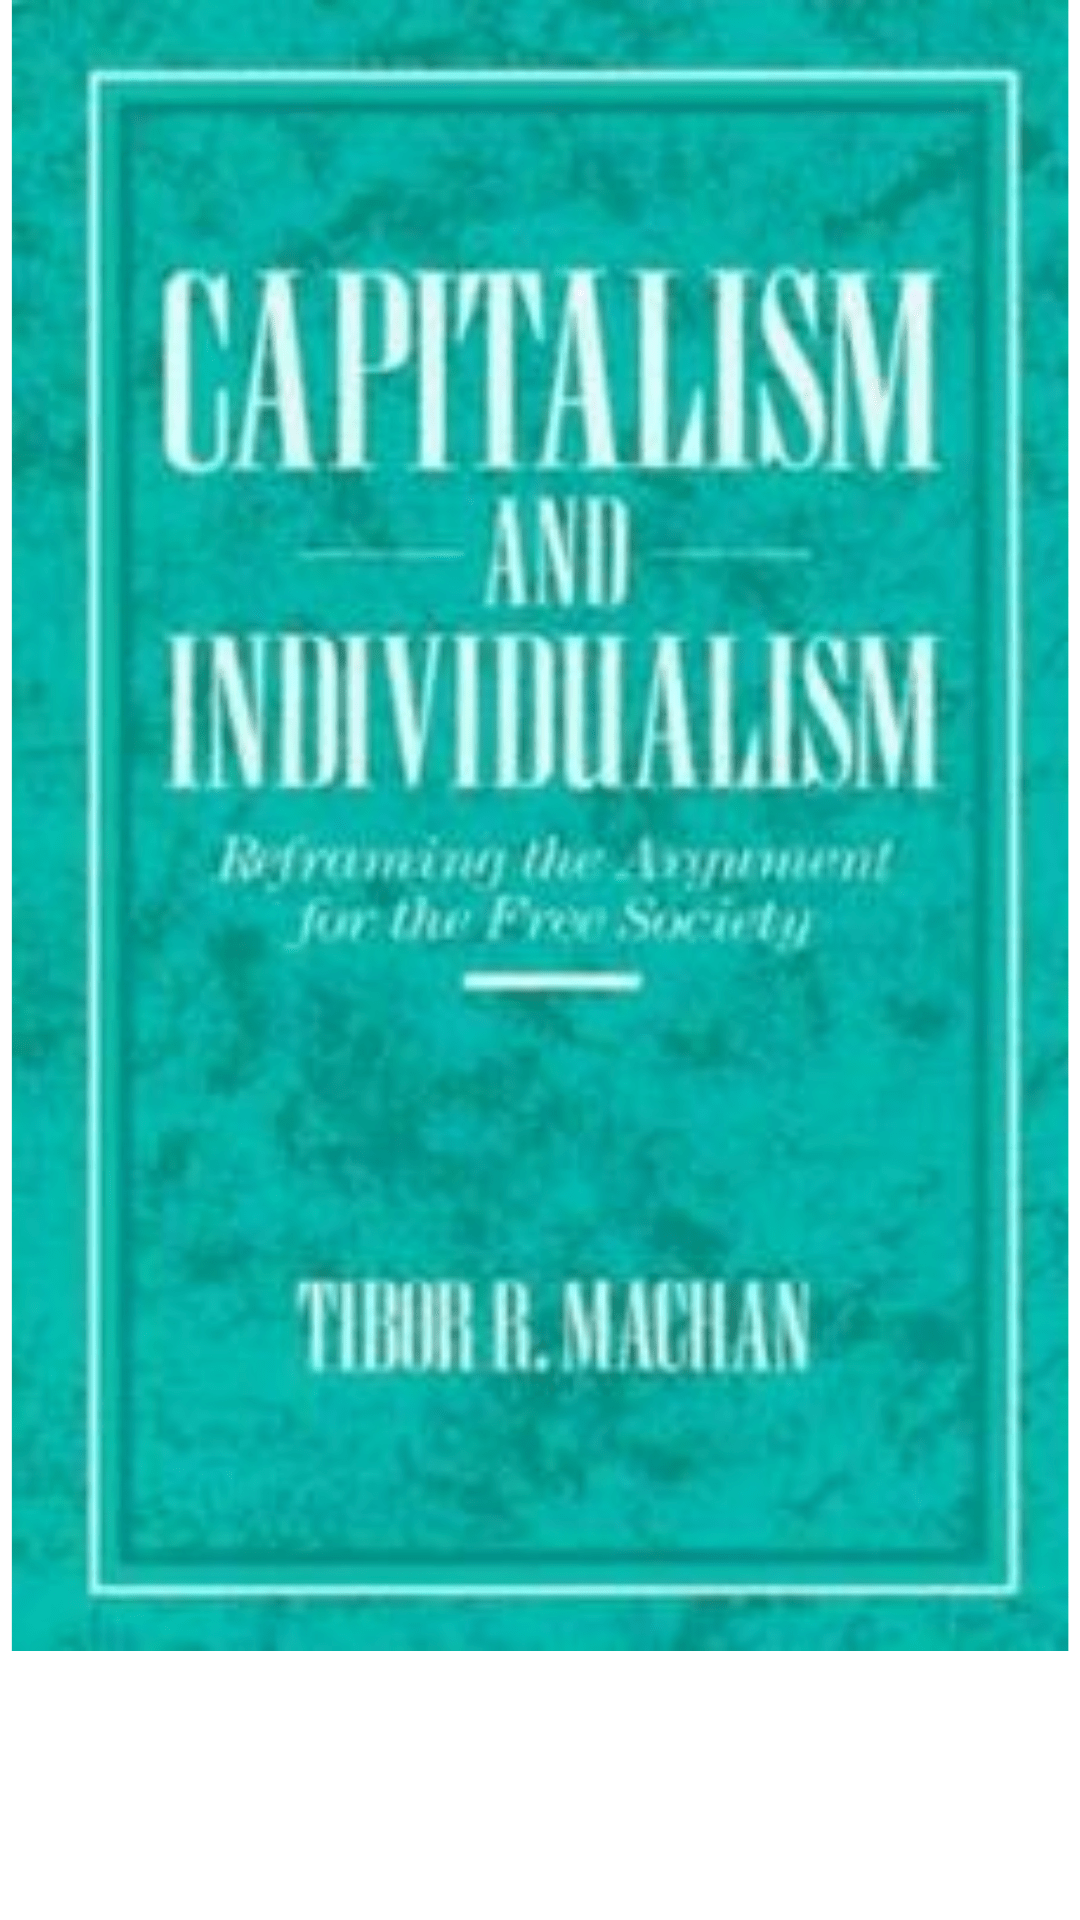 Capitalism and Individualism: Reframing the Argument for the Free Society